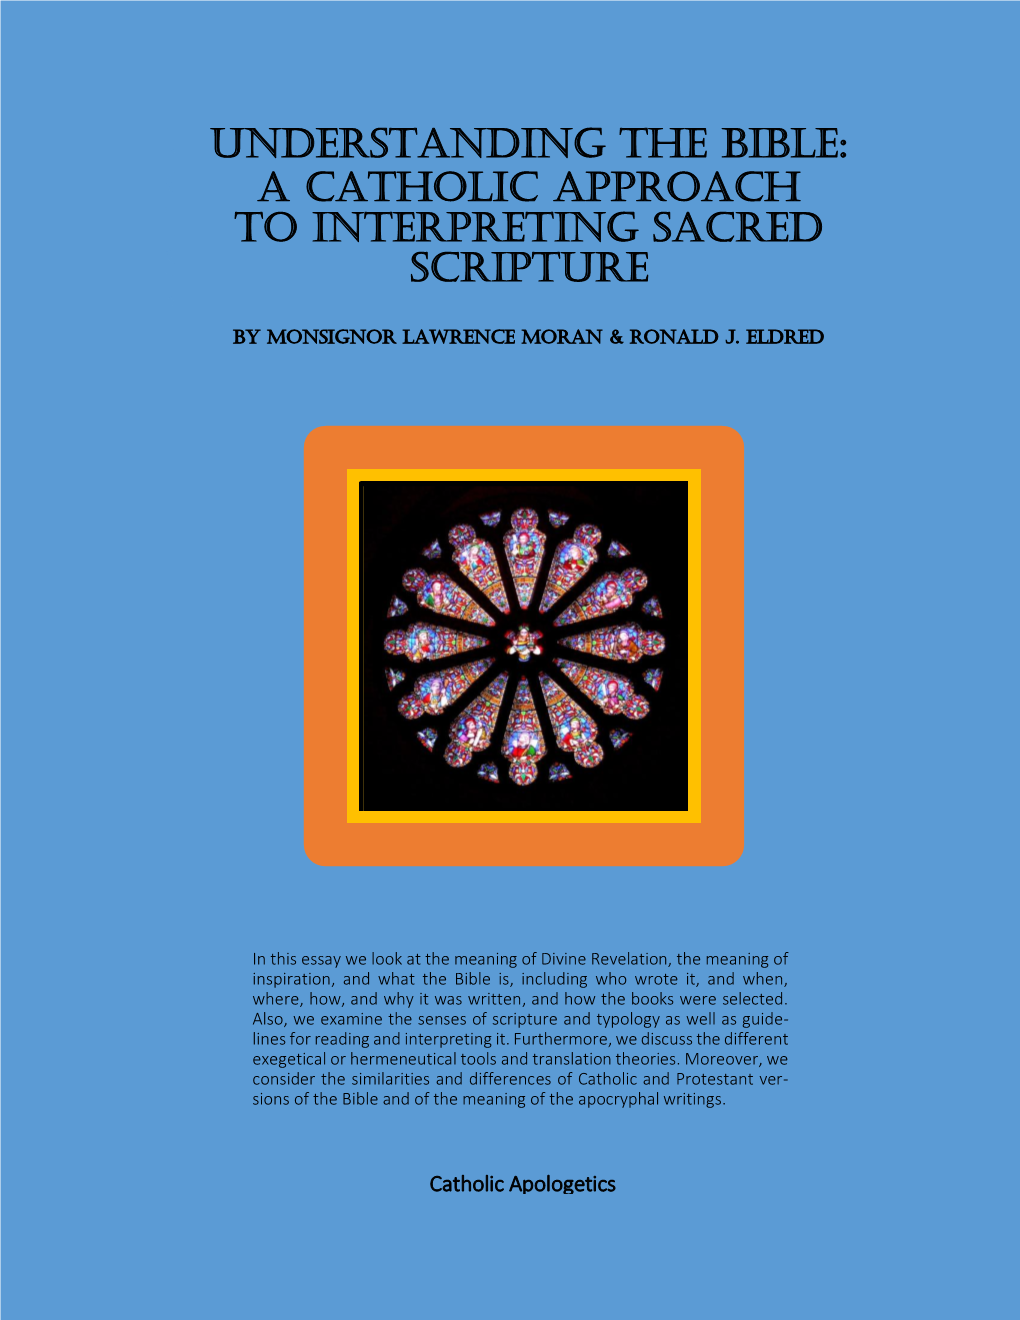 Understanding the Bible: a Catholic Approach to Interpreting Sacred Scripture by Monsignor Lawrence Moran & Ronald J